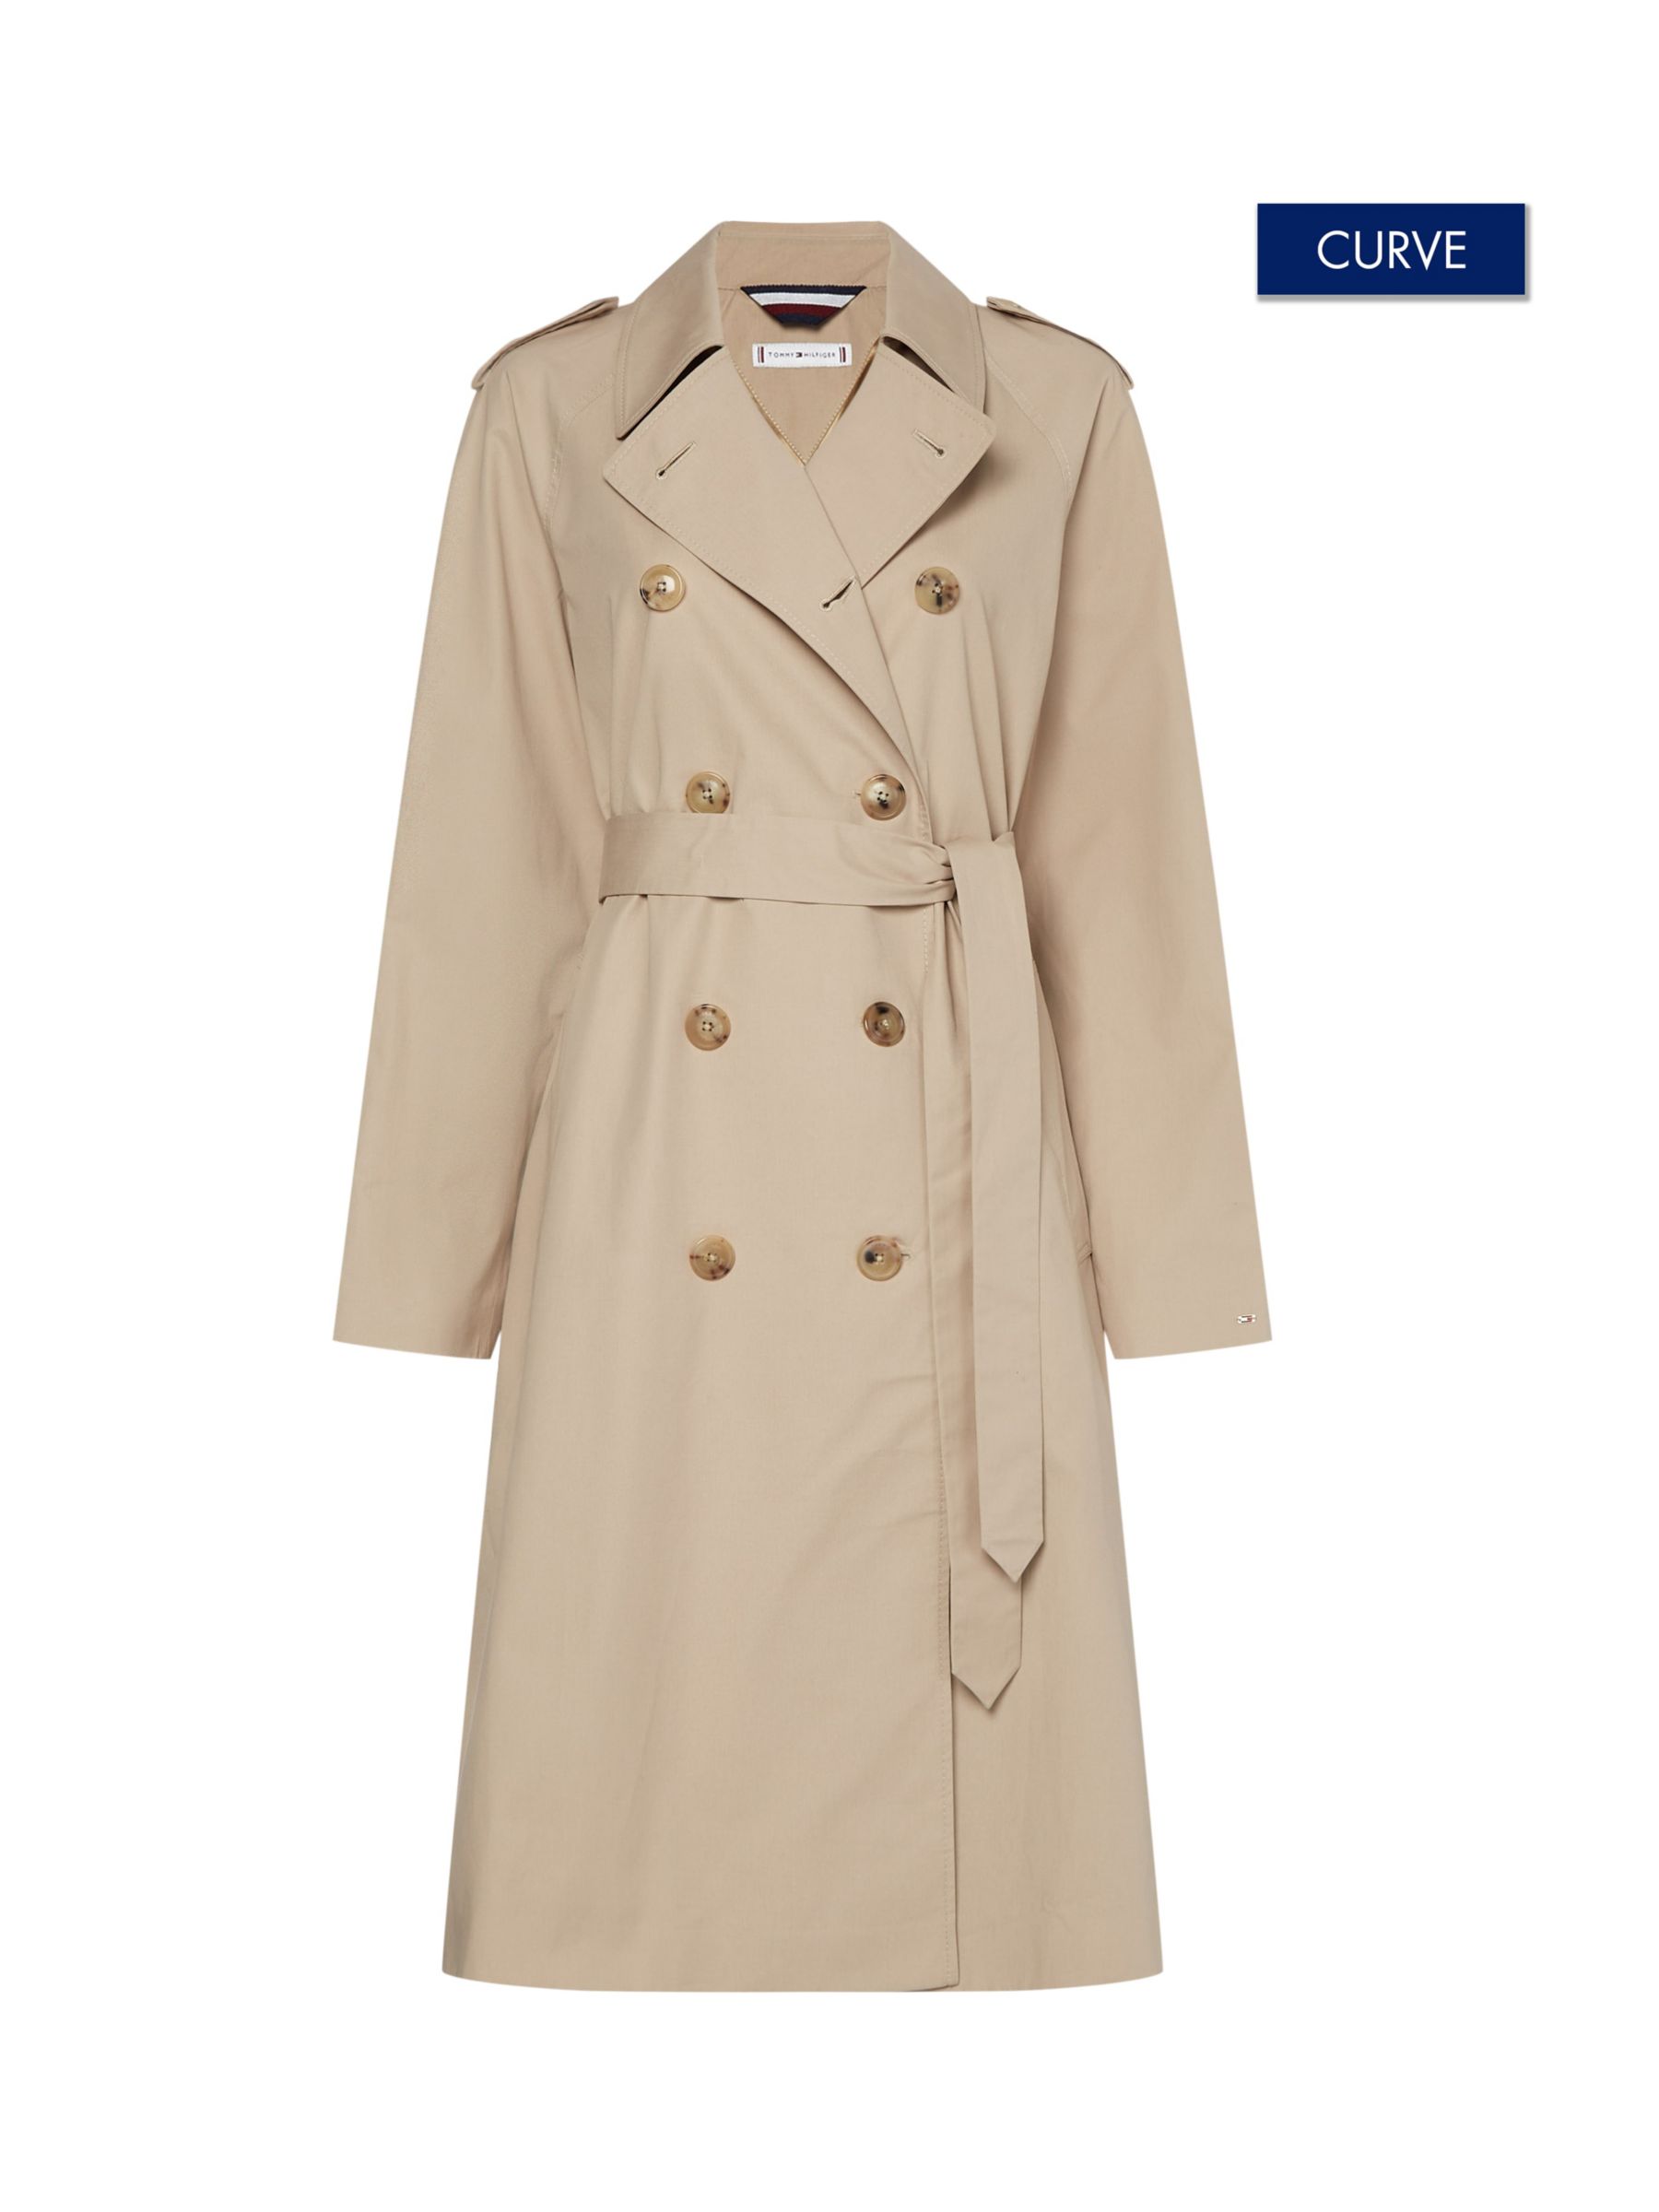 Kompliment restaurant tør Tommy Hilfiger Curve Organic Cotton Double Breasted Trench Coat, Beige at  John Lewis & Partners